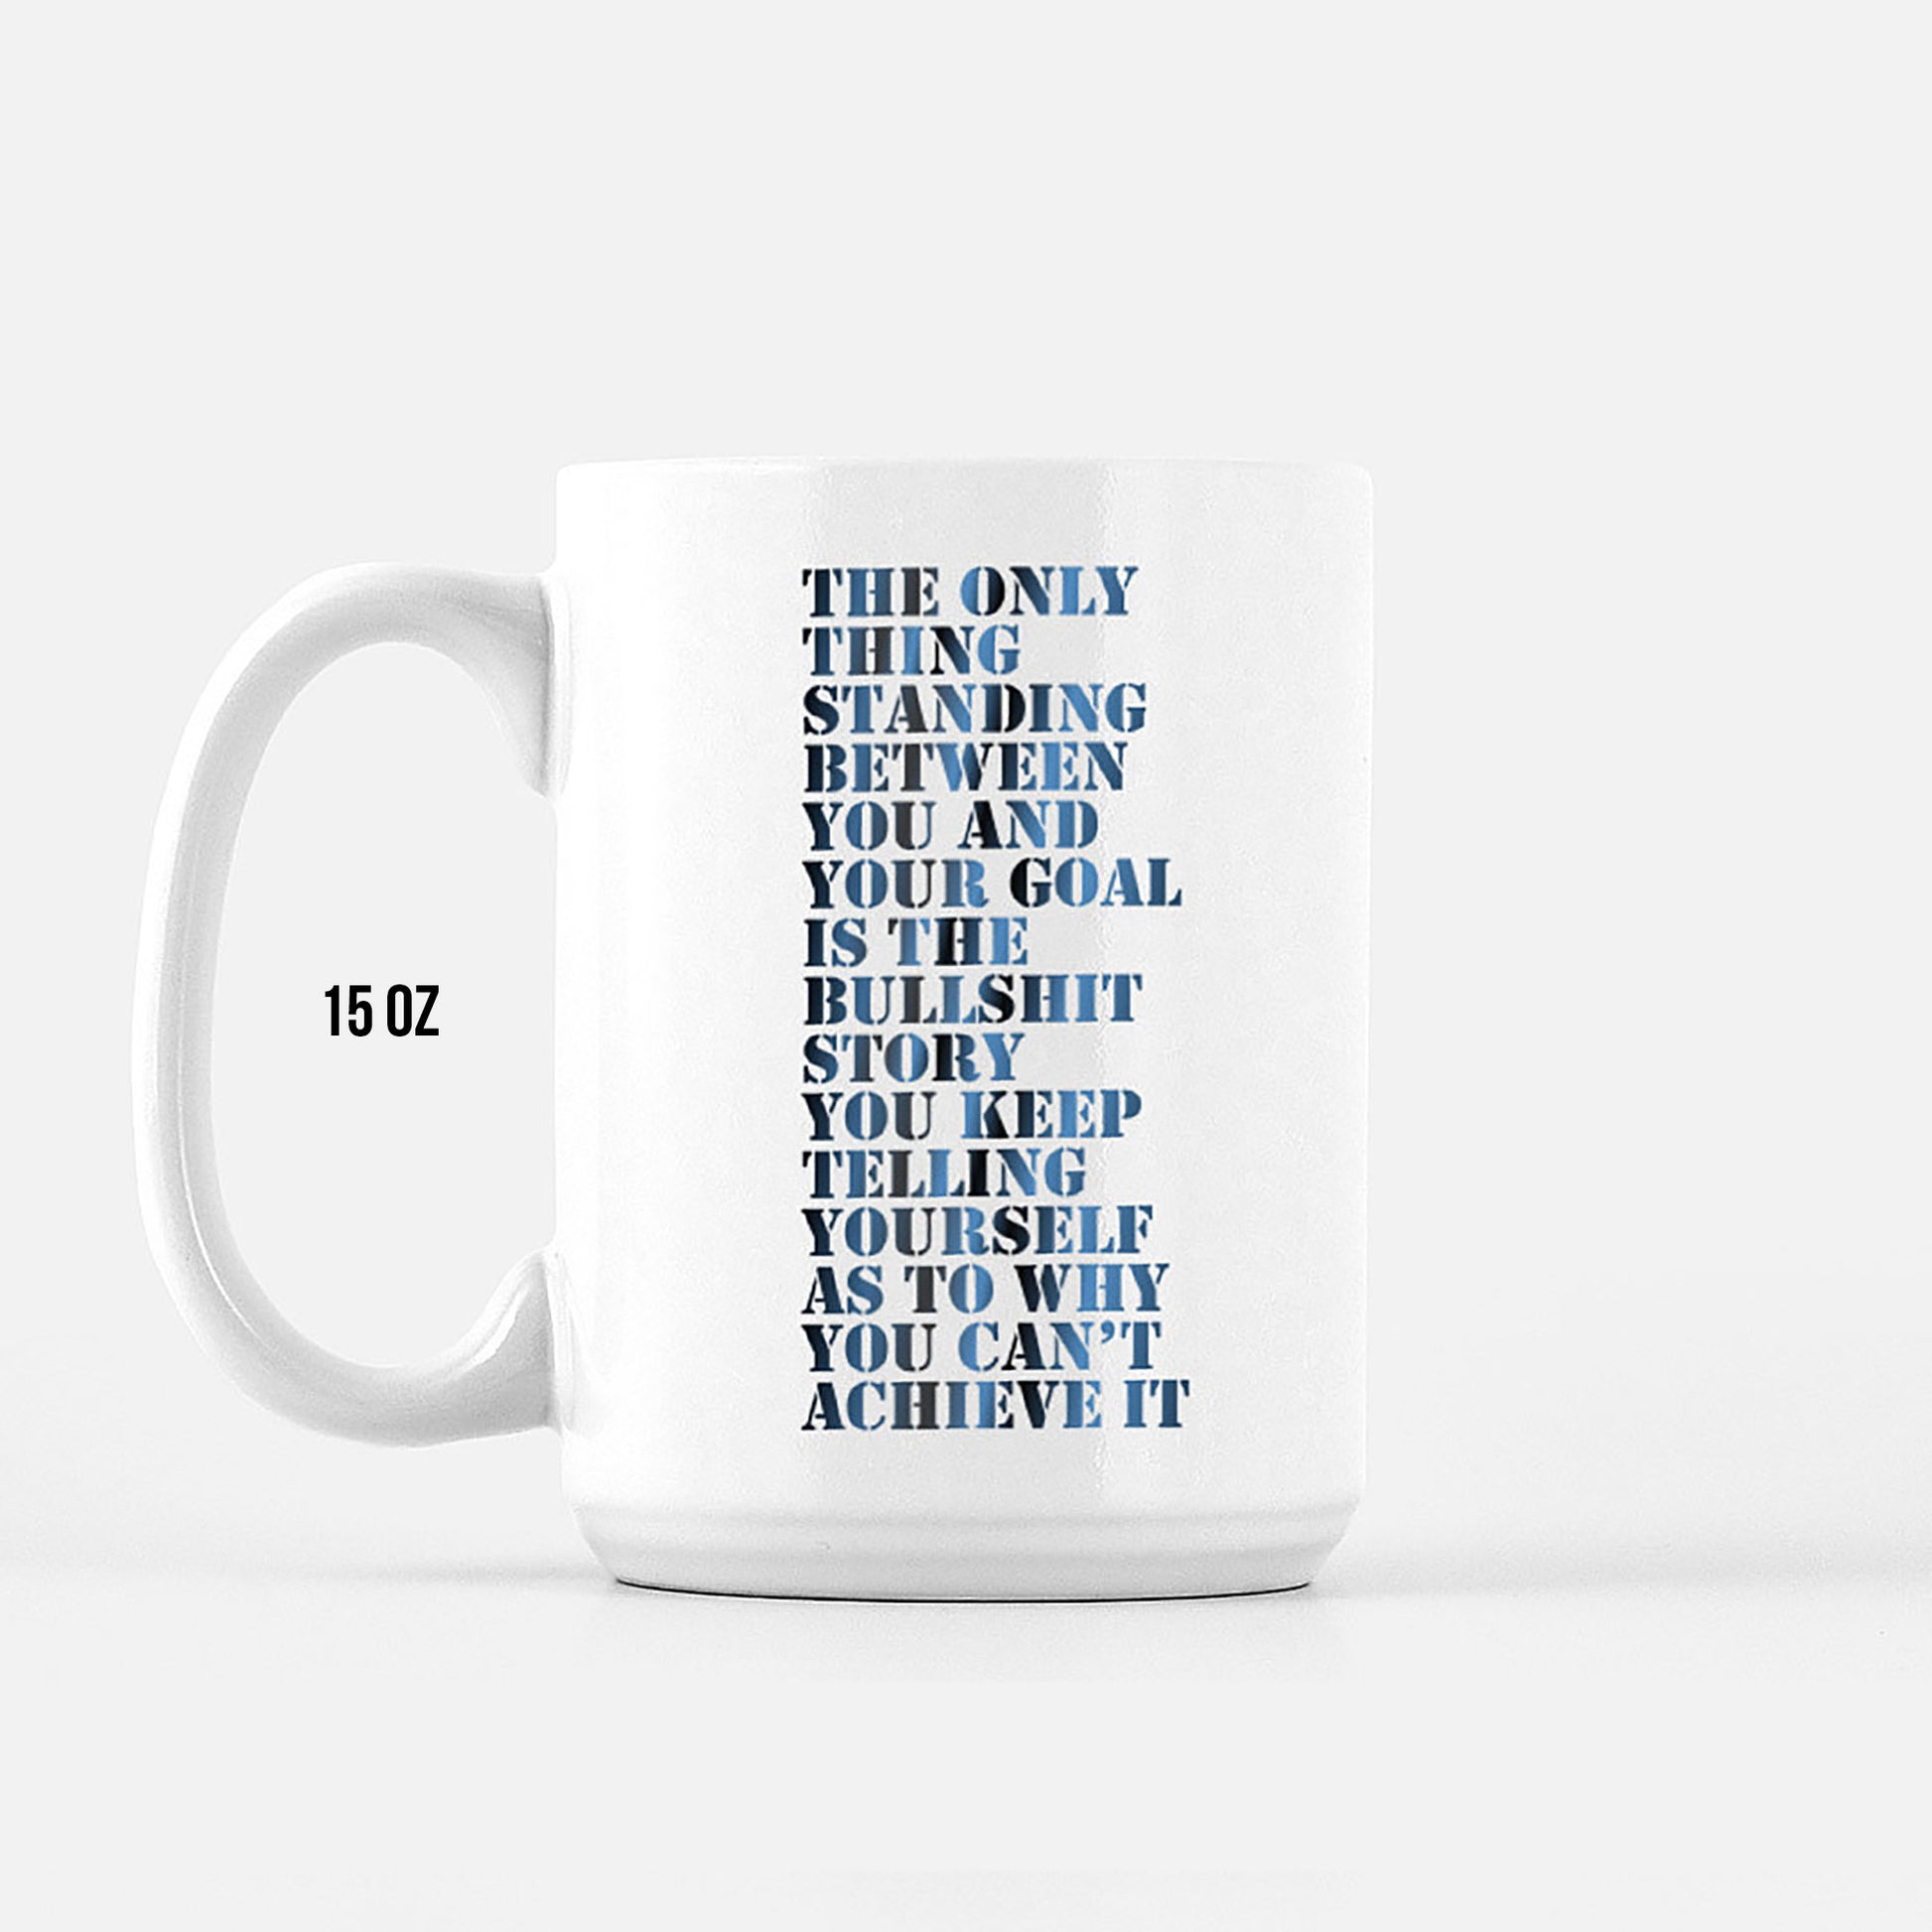 Wolf of Wallstreet Mug  - Inspirational quote reading, "The only thing standing between you and your goal is the bullshit story you keep telling yourself as to why you can't achieve it."